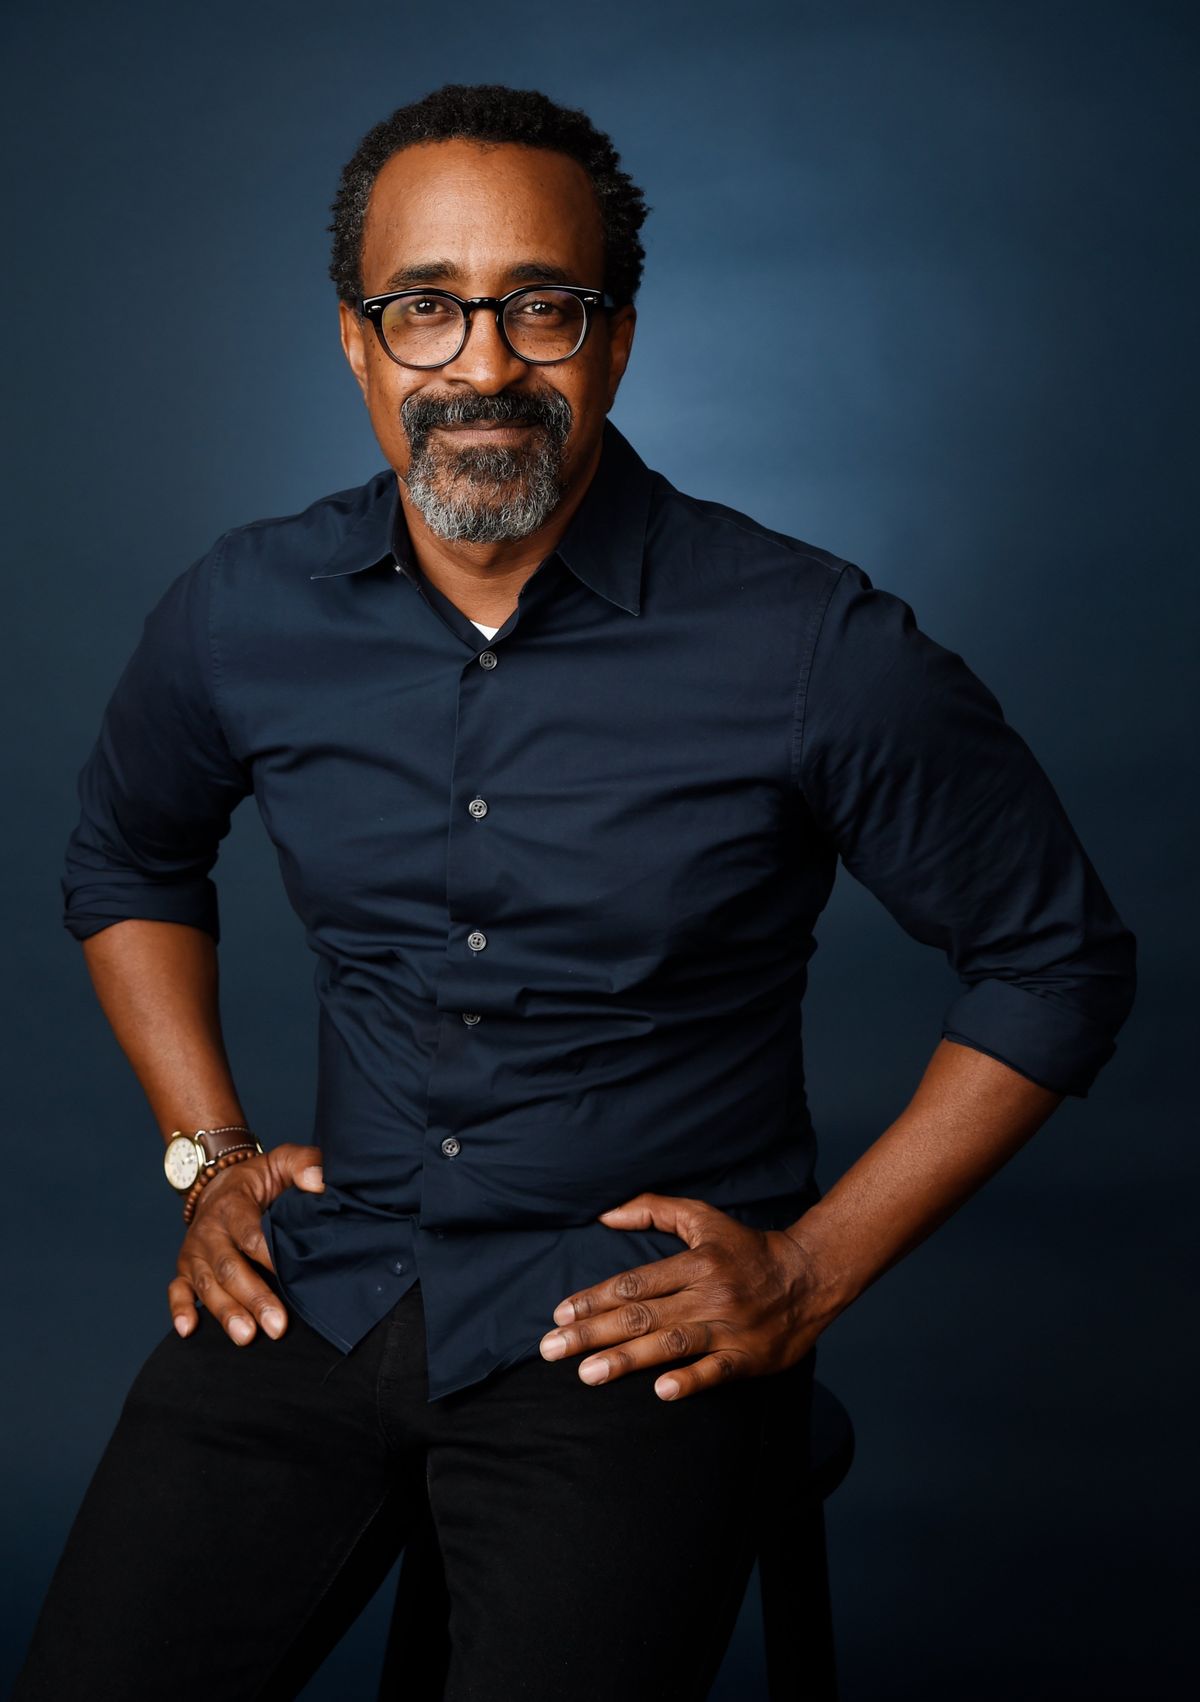 Tim Meadows, headlining Spokane Comedy Club this weekend, audiences 'don't actually know me' The Spokesman-Review